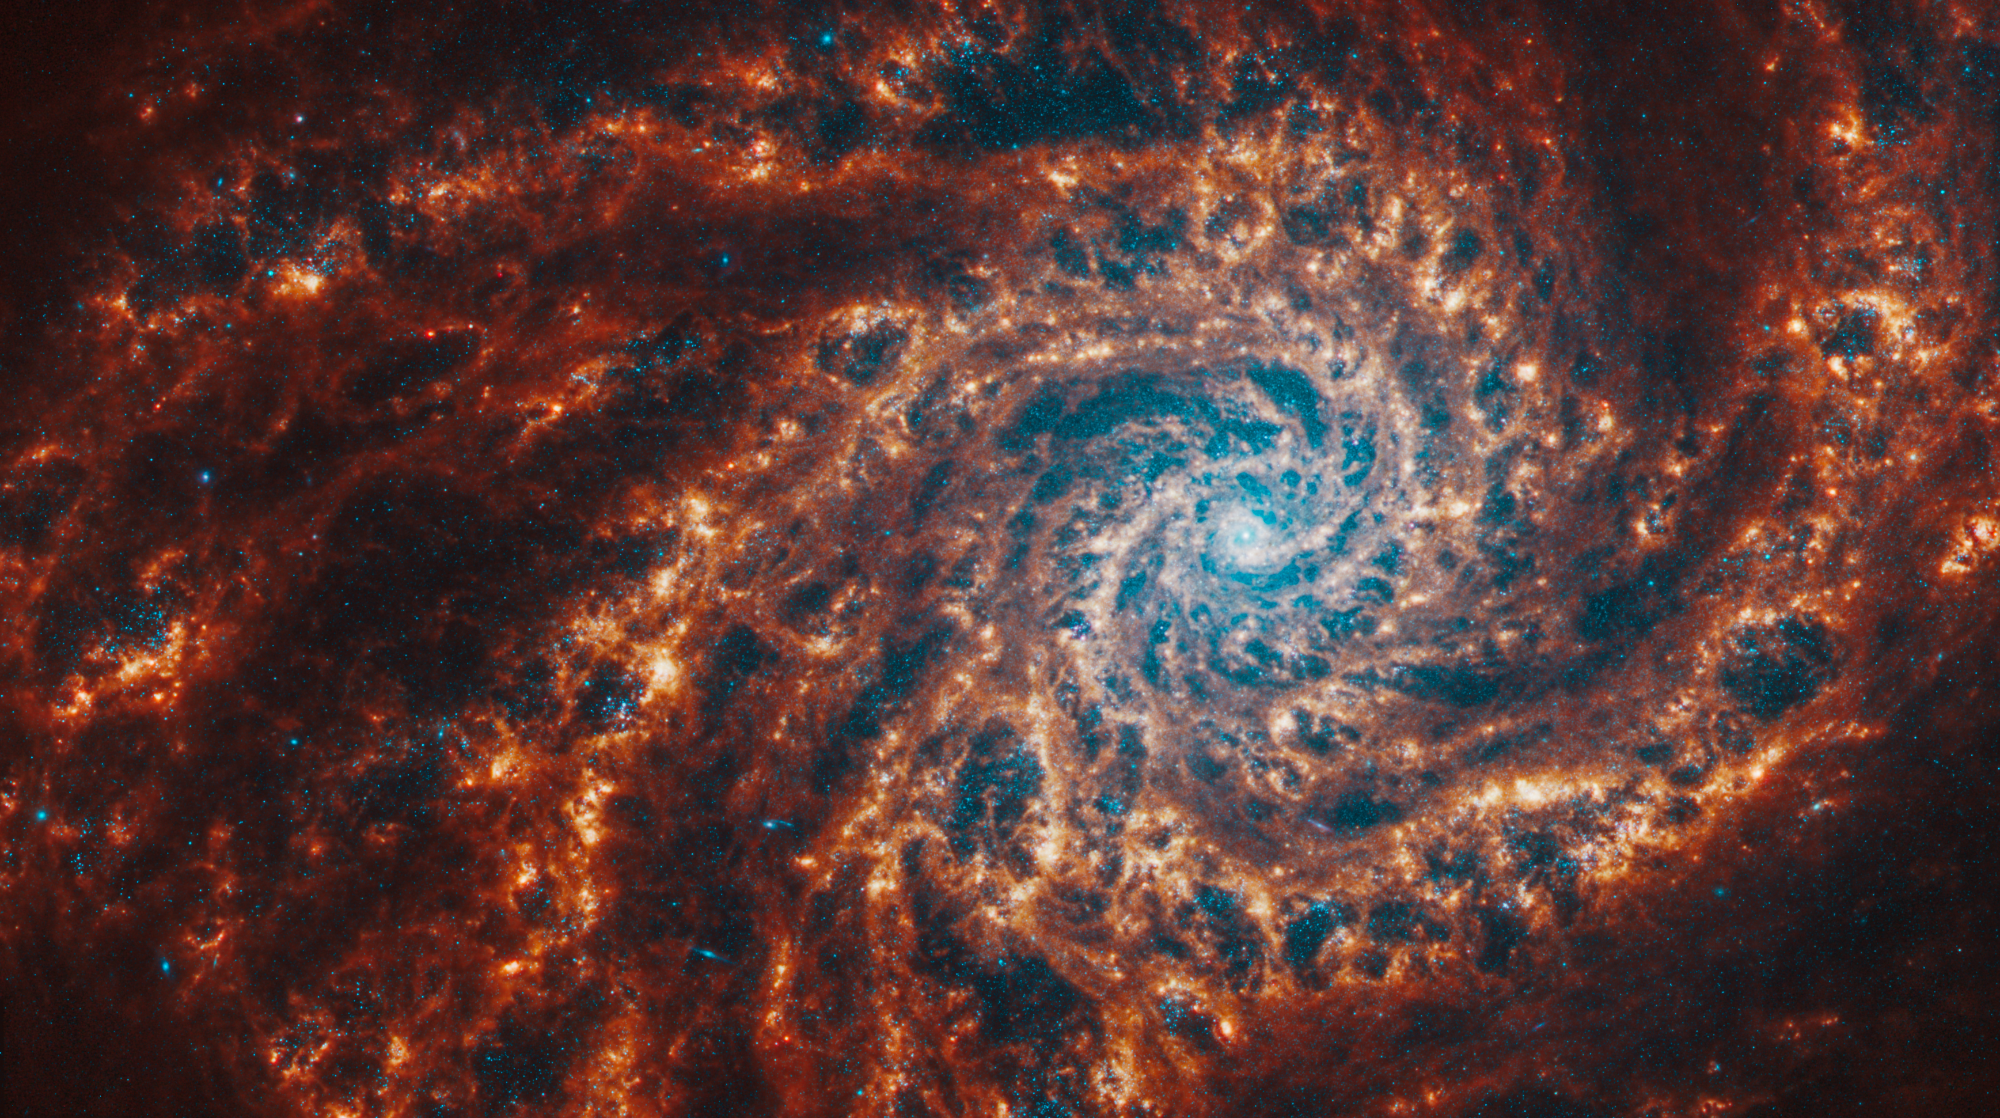 Webb’s image of NGC 4254 shows a densely populated face-on spiral galaxy anchored by its central region, which has a light blue haze that takes up about a quarter of the view. In this circular core is the brightest blue area. Within the core are populations of older stars, represented by many pinpoints of blue light. Spiny spiral arms made of stars, gas, and dust also start at the center, largely starting in the wider area of the blue haze. The spiral arms extend to the edges, rotating counterclockwise. The spiraling filamentary structure looks somewhat like a cross section of a nautilus shell. The arms of the galaxy are largely orange, ranging from dark to bright orange. Scattered across the packed scene are some additional bright blue pinpoints of light, which are stars spread throughout the galaxy. In areas where there is less orange, it is darker, and some dark regions look more circular.